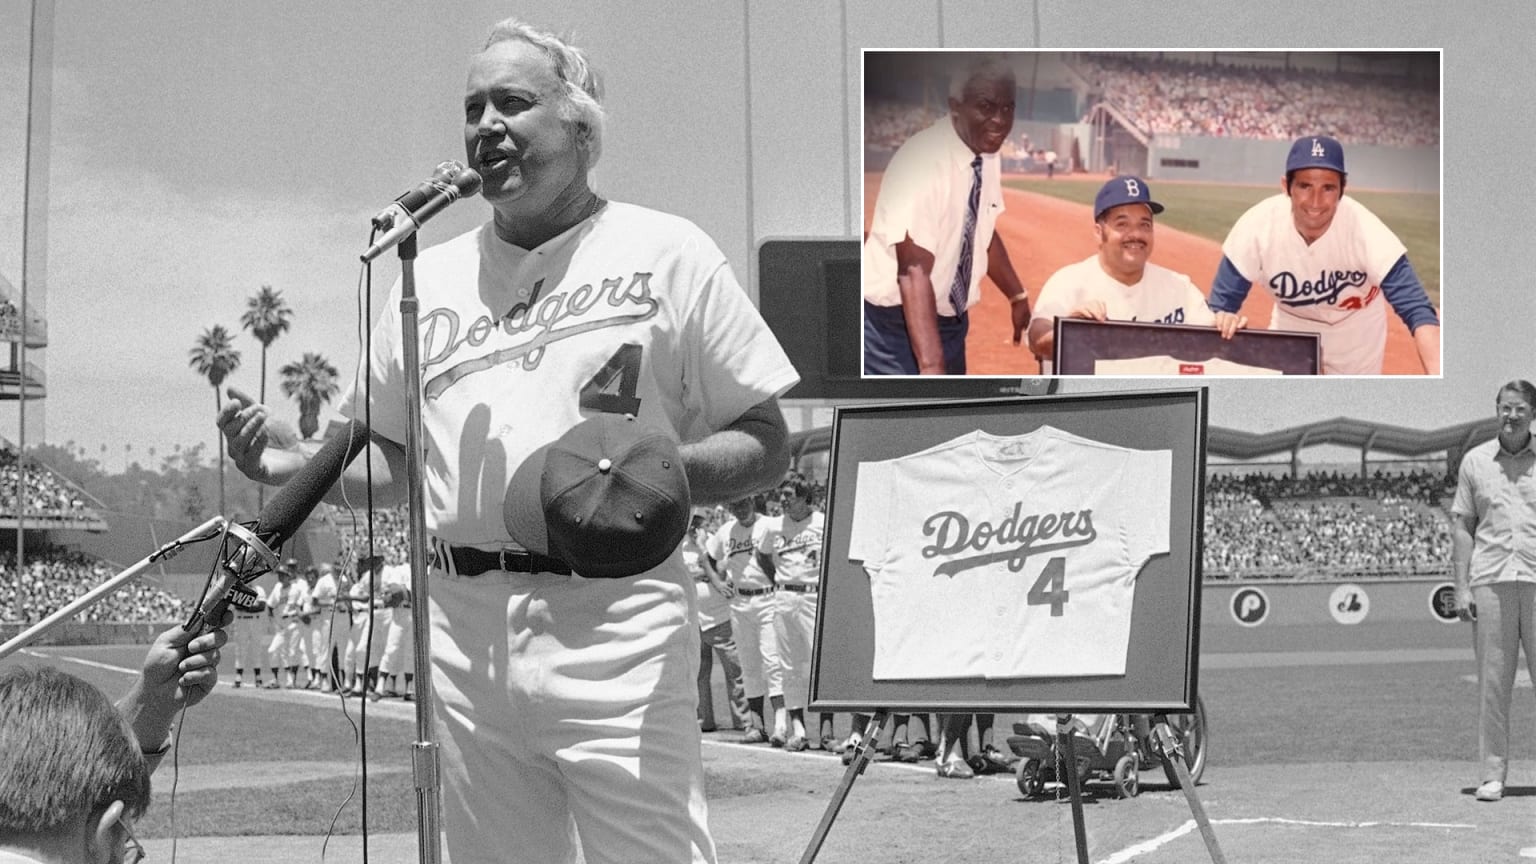 On June 4, 1972, the Dodgers retired three jersey numbers: Roy